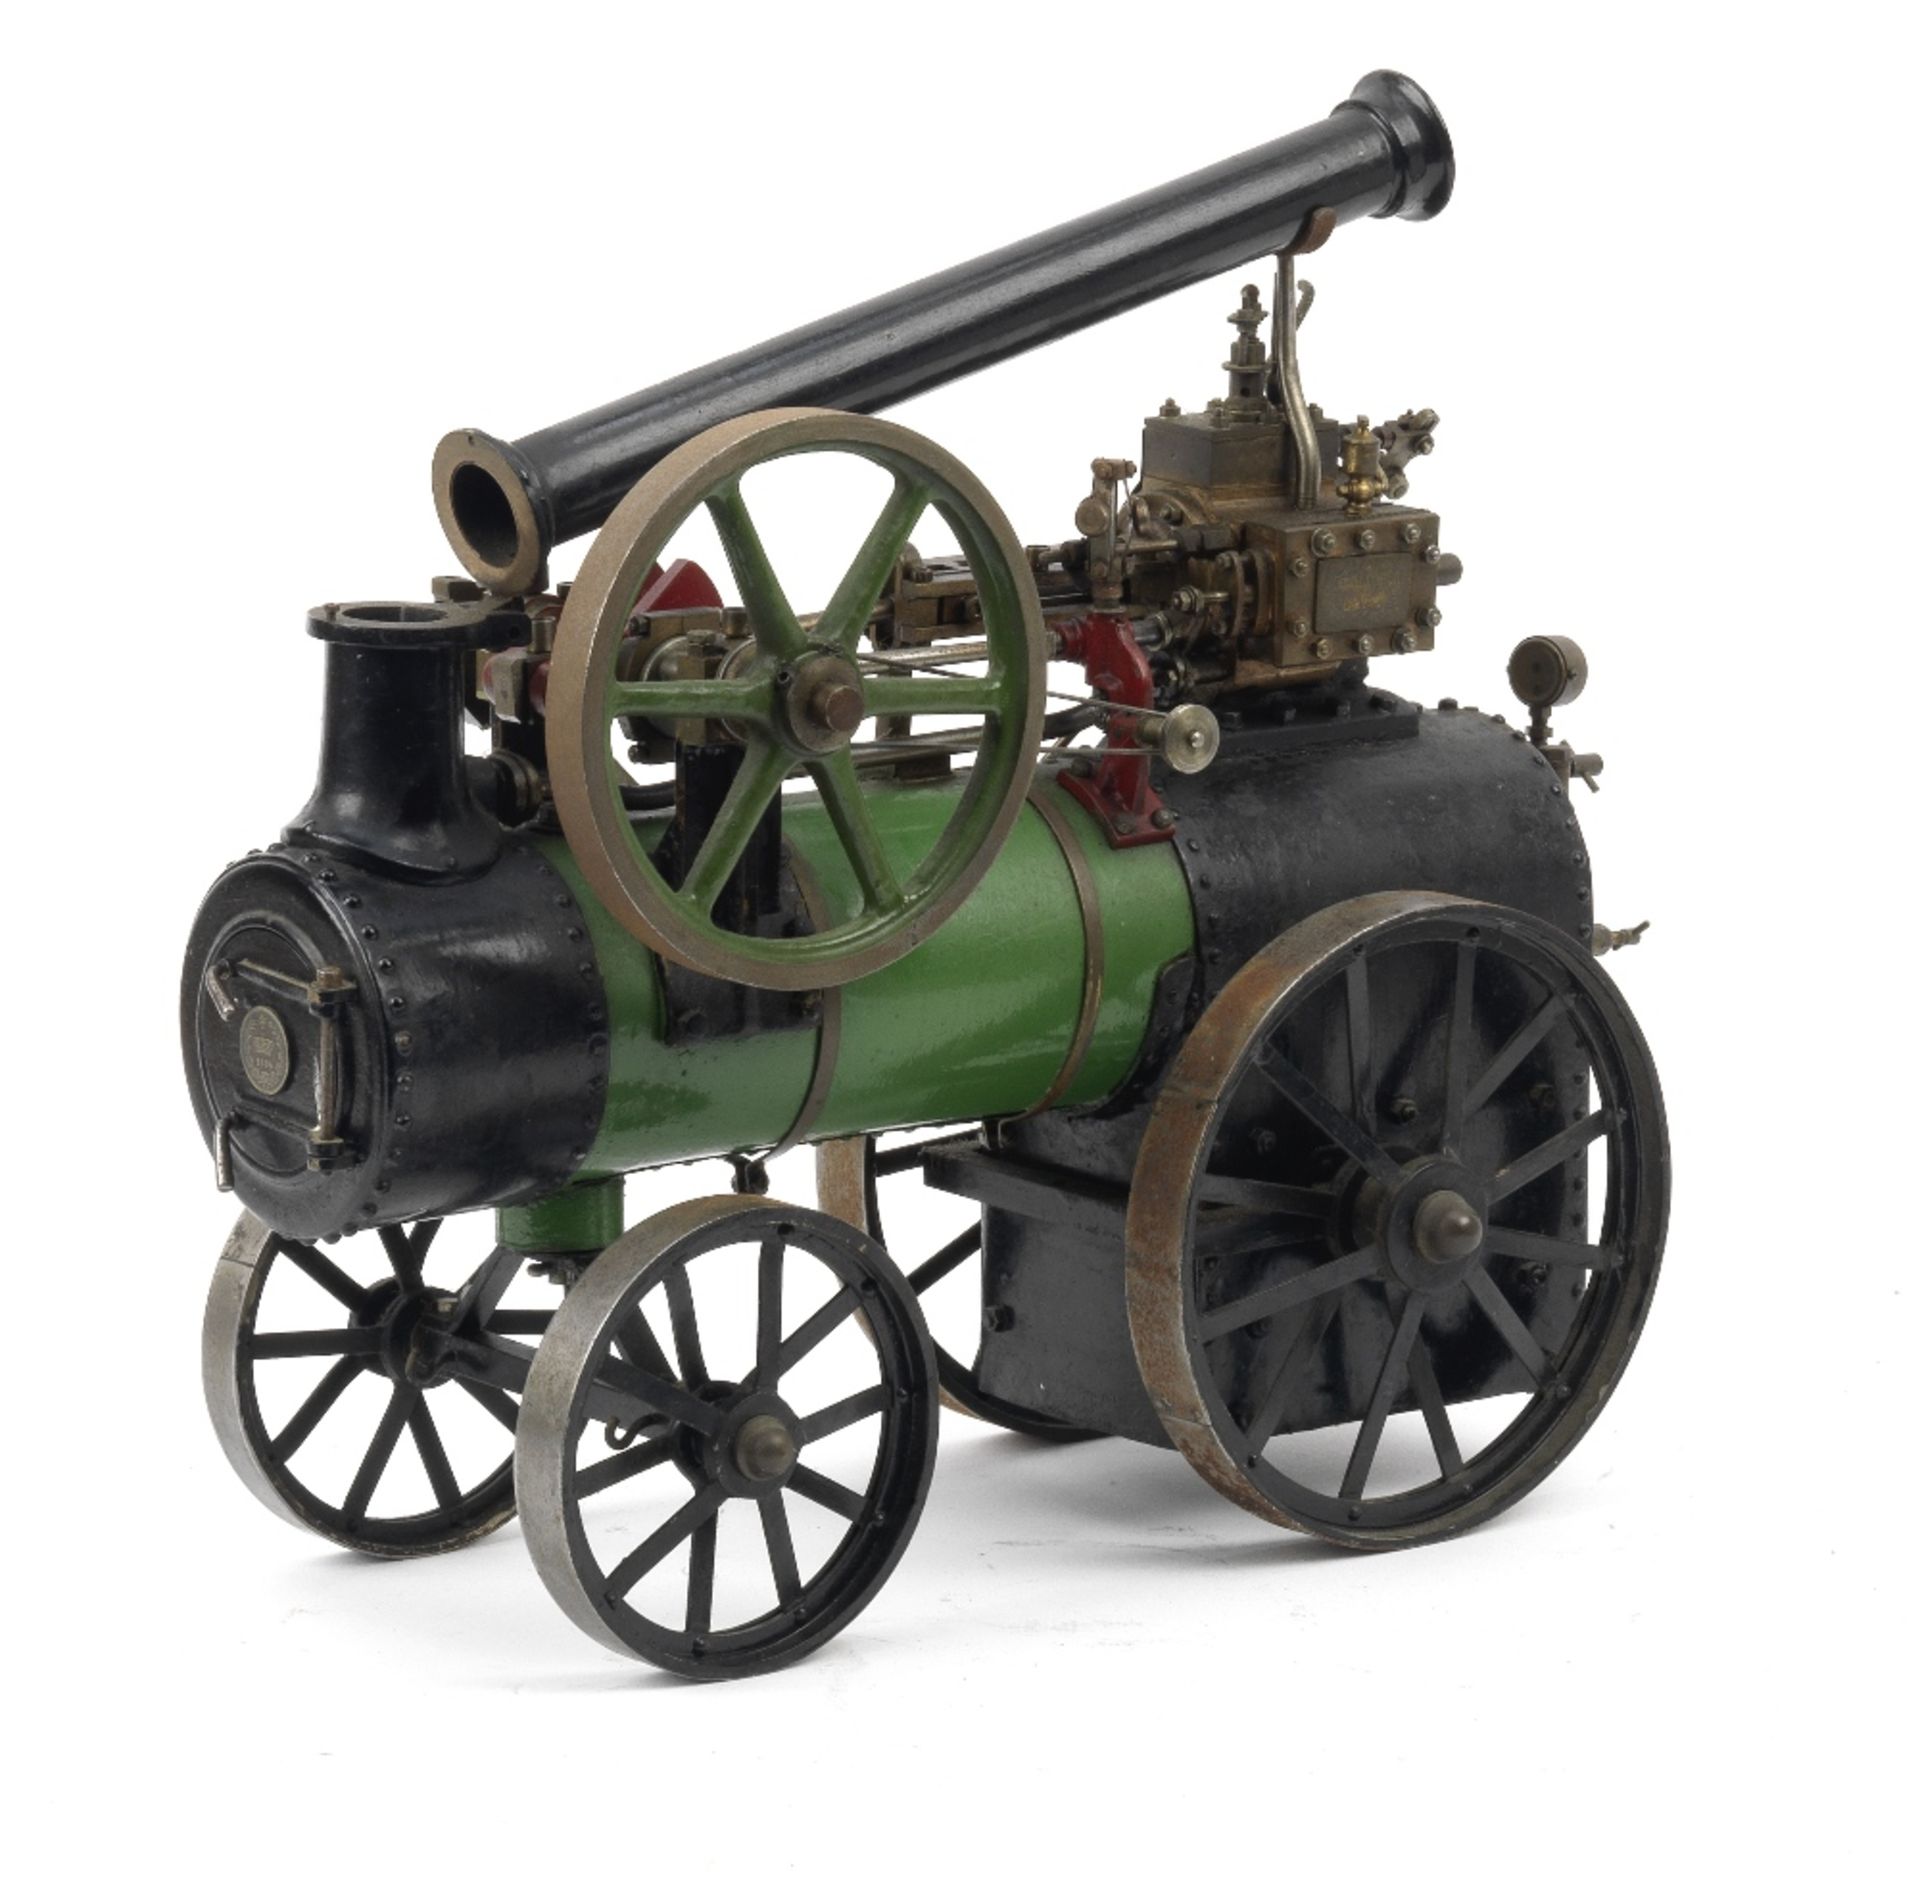 A live steam engineer's model of a Portable Engine, by A.C.Ballchin, dated 1973,